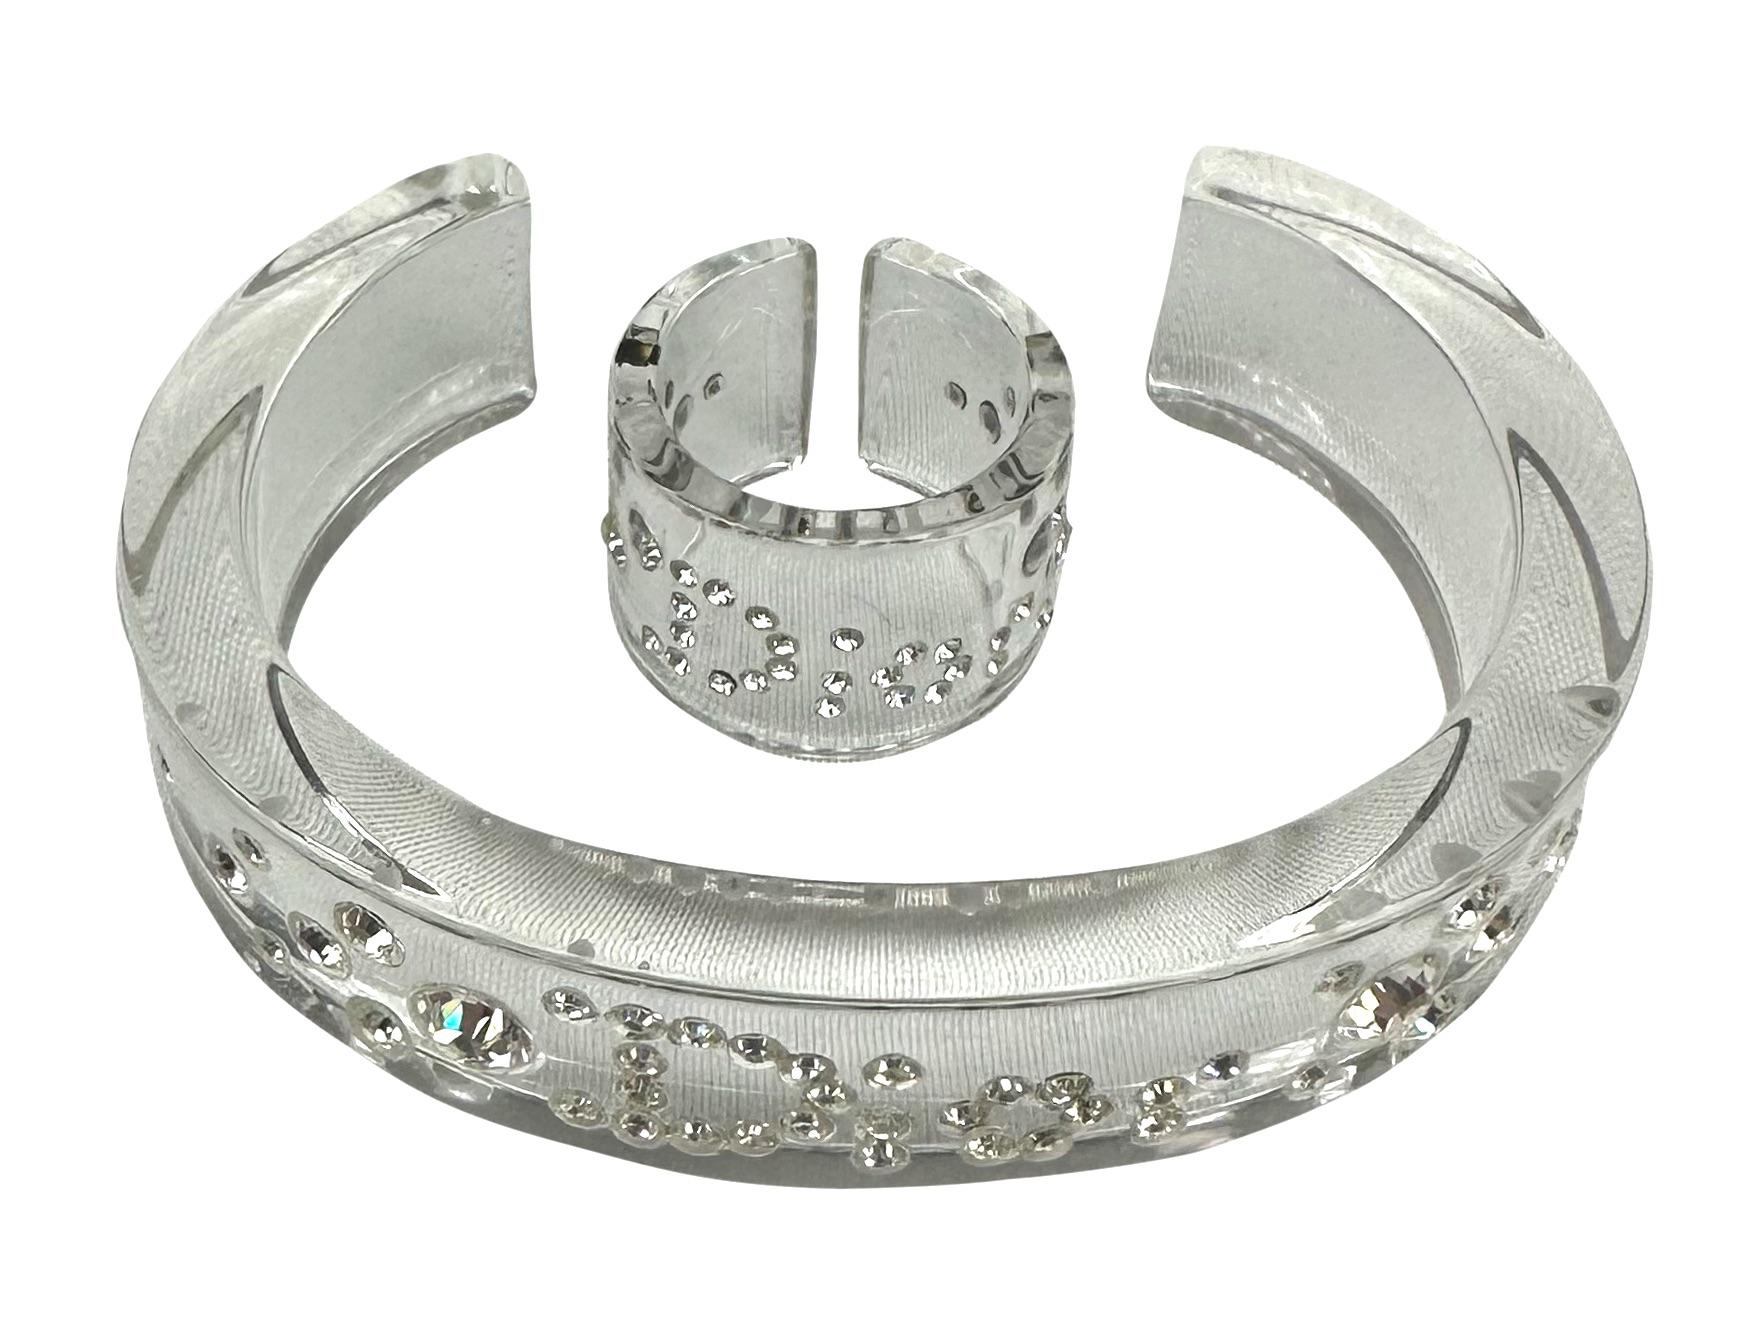 Presenting a clear crystal Christian Dior cuff and ring set, designed by John Galliano. From the early 2000s, this lucite set is the perfect Y2K addition to any outfit. 

Approximate Measurements:
Length: 0.6